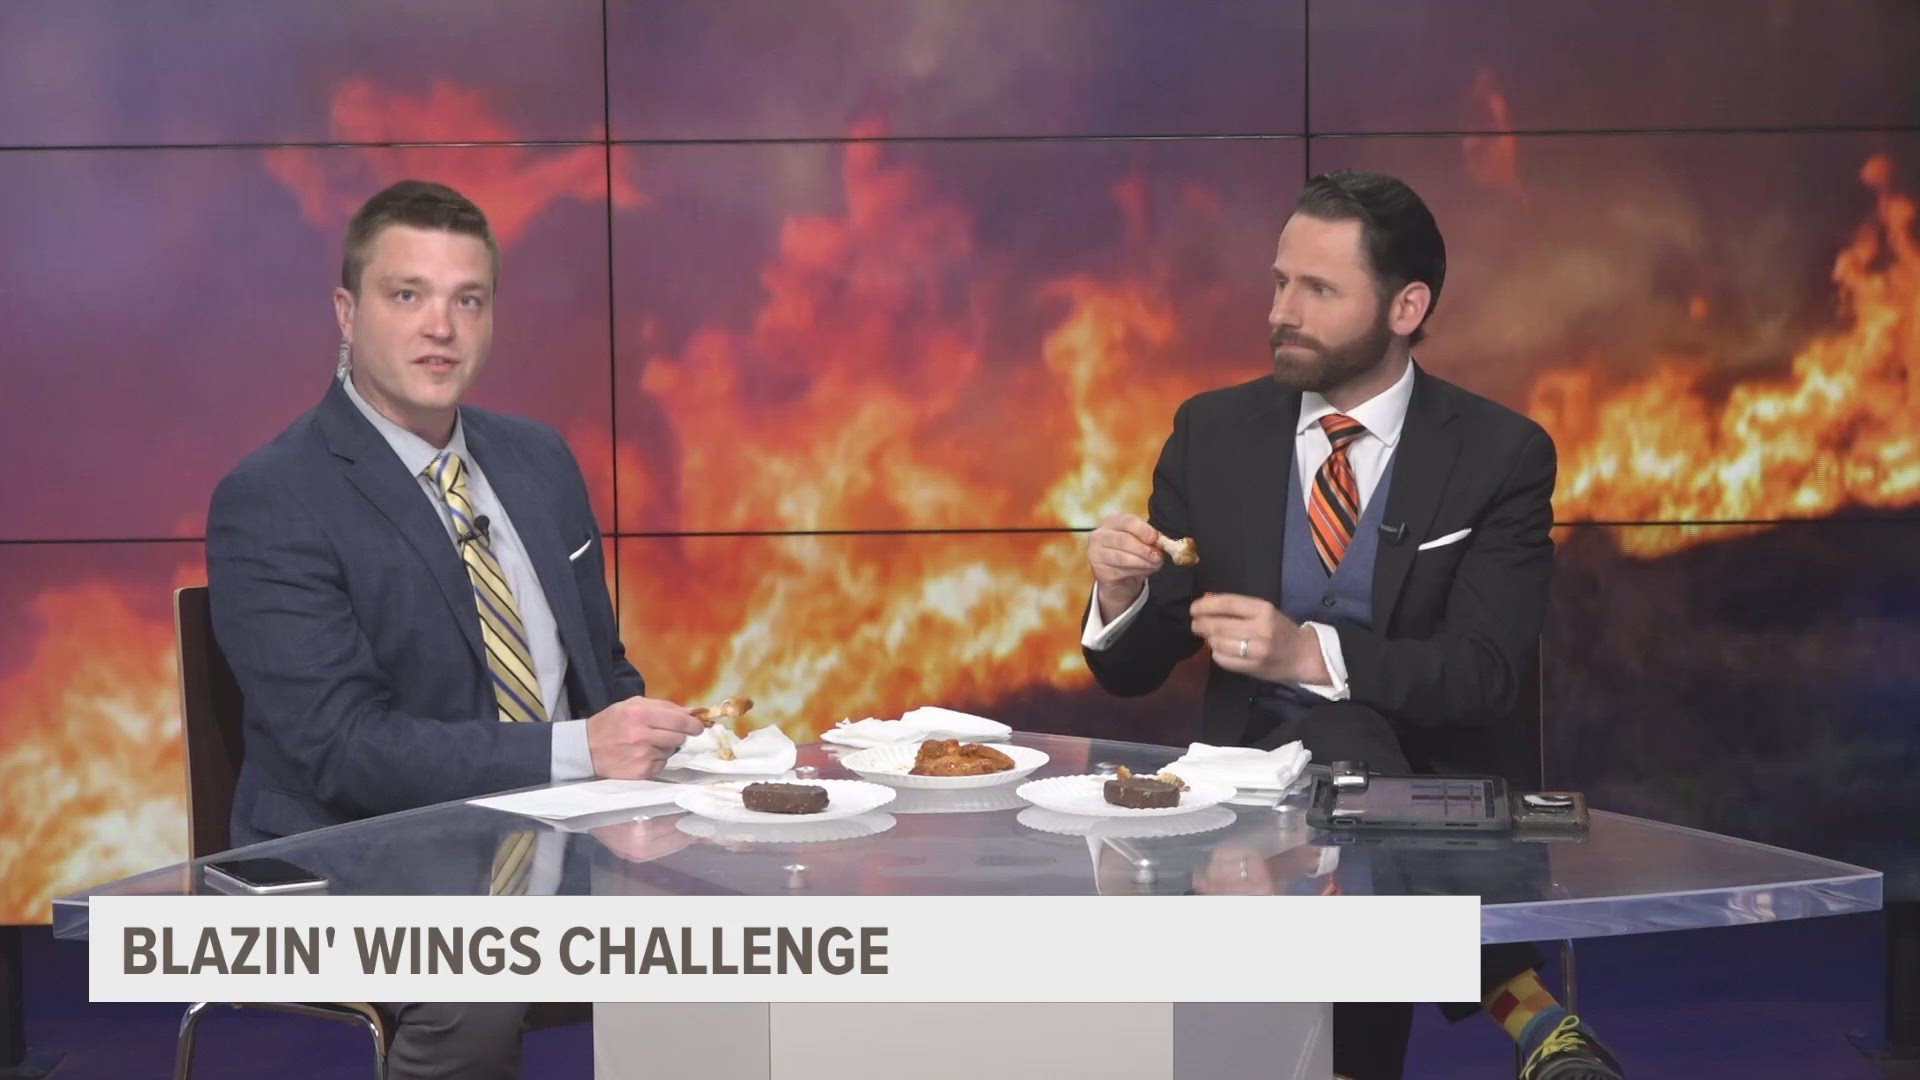 Meteorologist Blake Hansen will be participating in the Blazin’ Hot Wings Challenge to help raise awareness and money for smoke alarms.